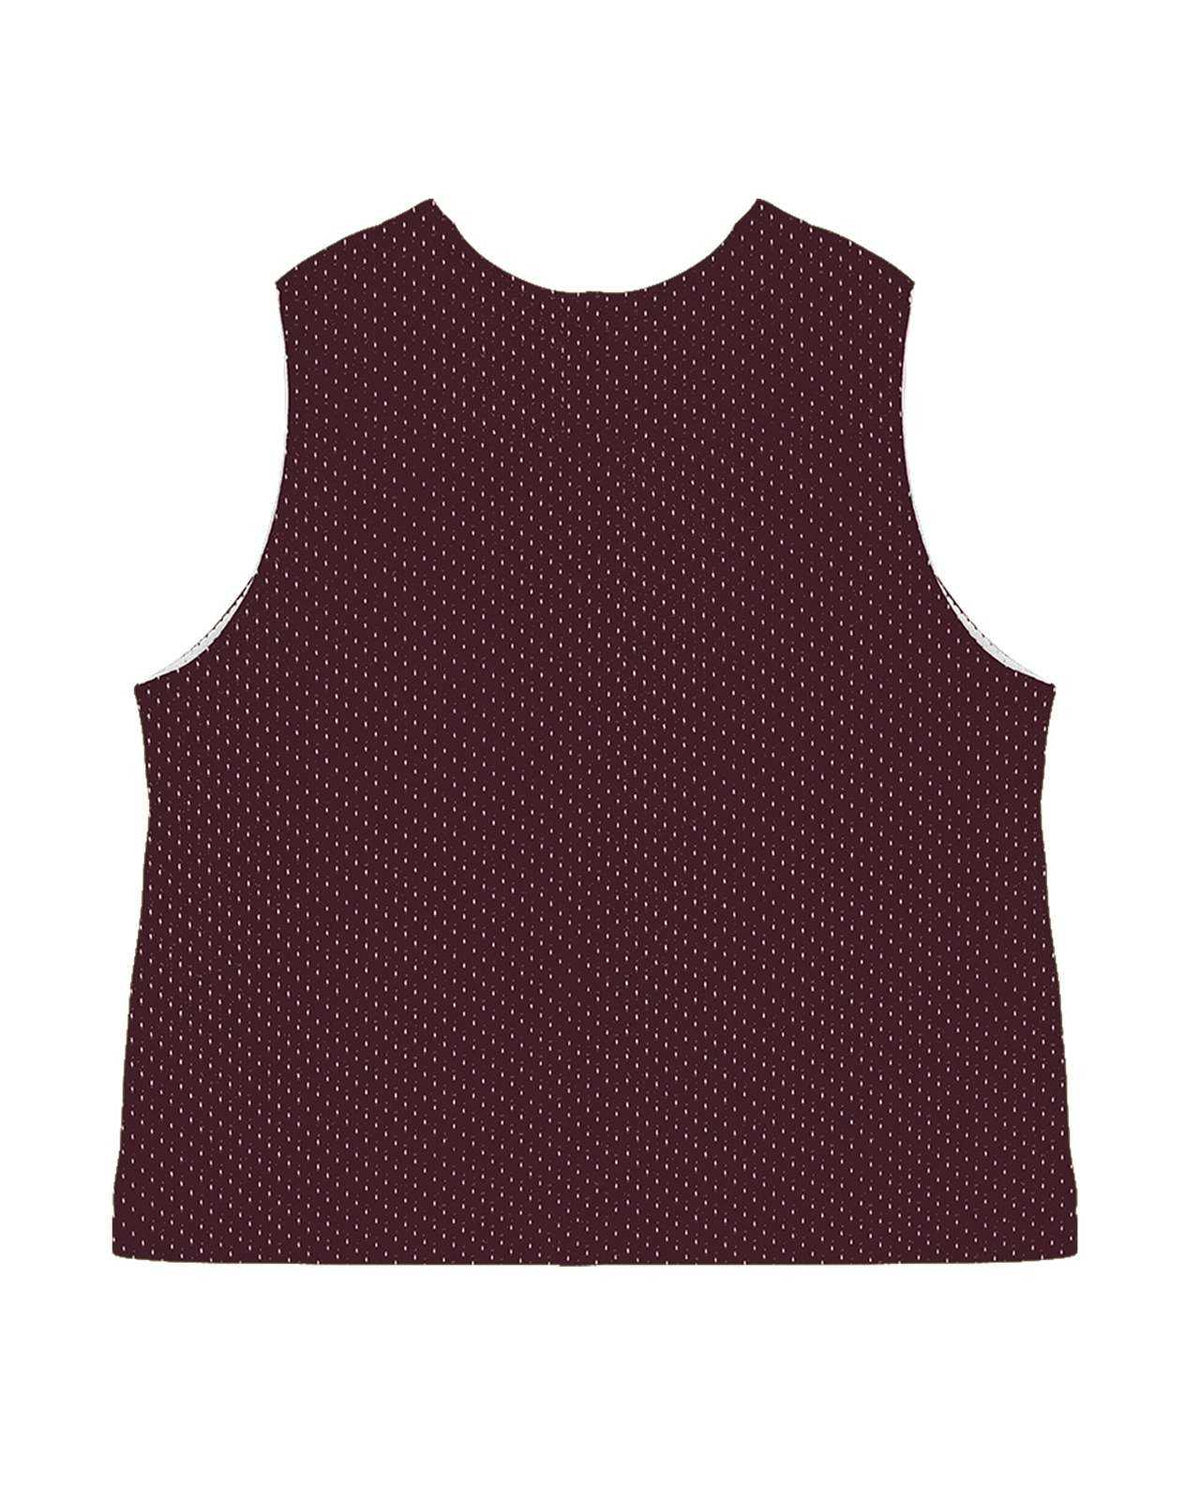 C2 Sport 5260 Mesh Reversible Youth Pinnie - Maroon White - HIT a Double - 3